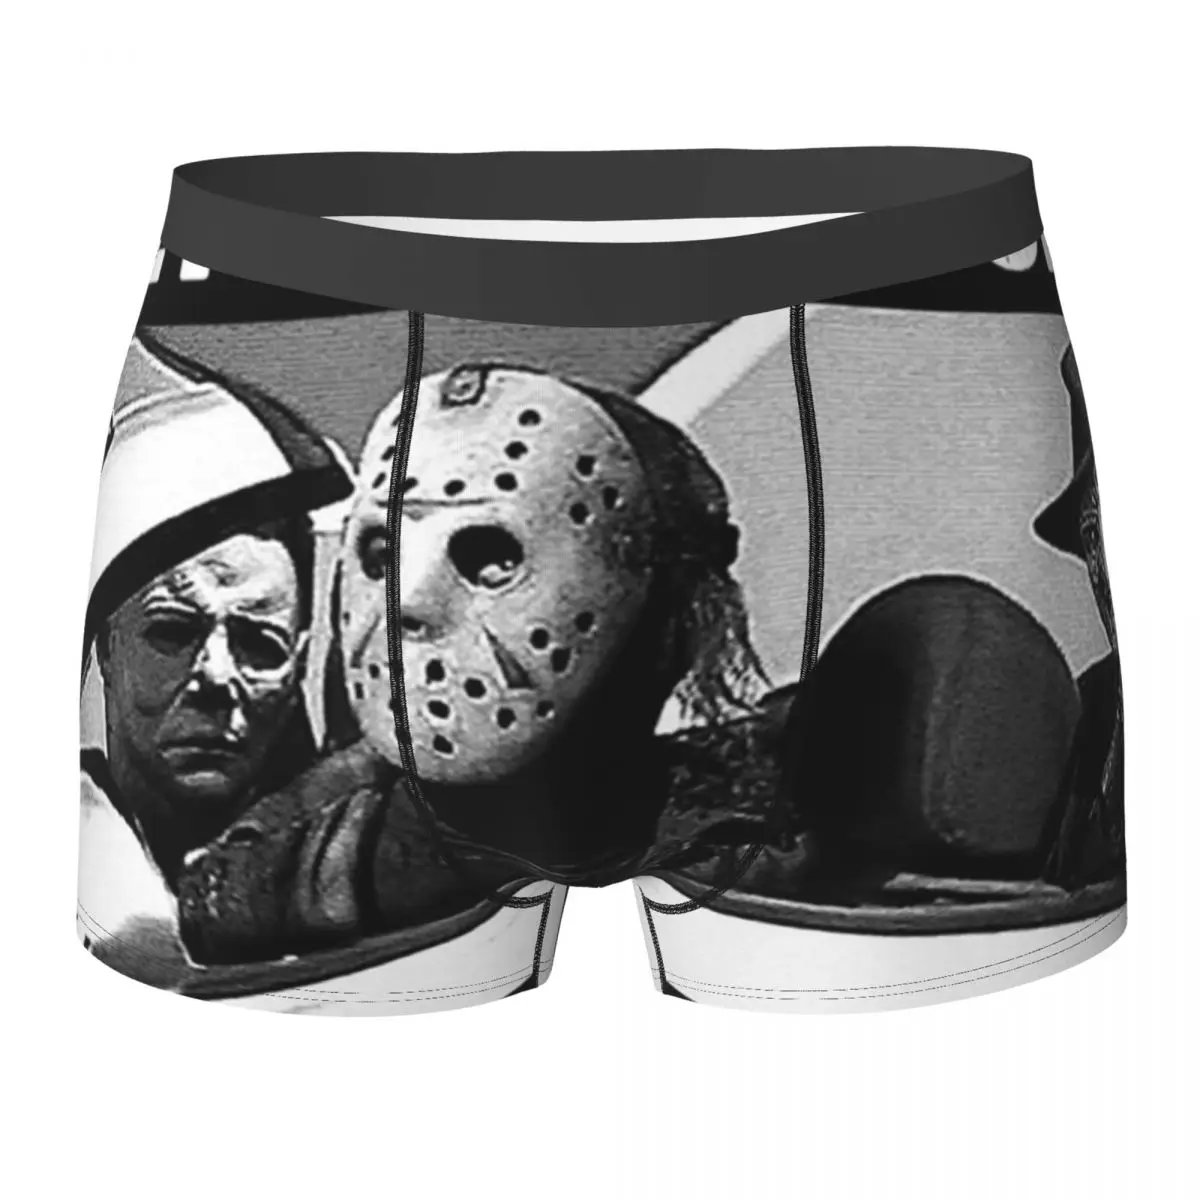 

Get In Loser We're Going Killing Underwear Holloween Horror Males Underpants Customs Soft Boxershorts High Quality Boxer Brief